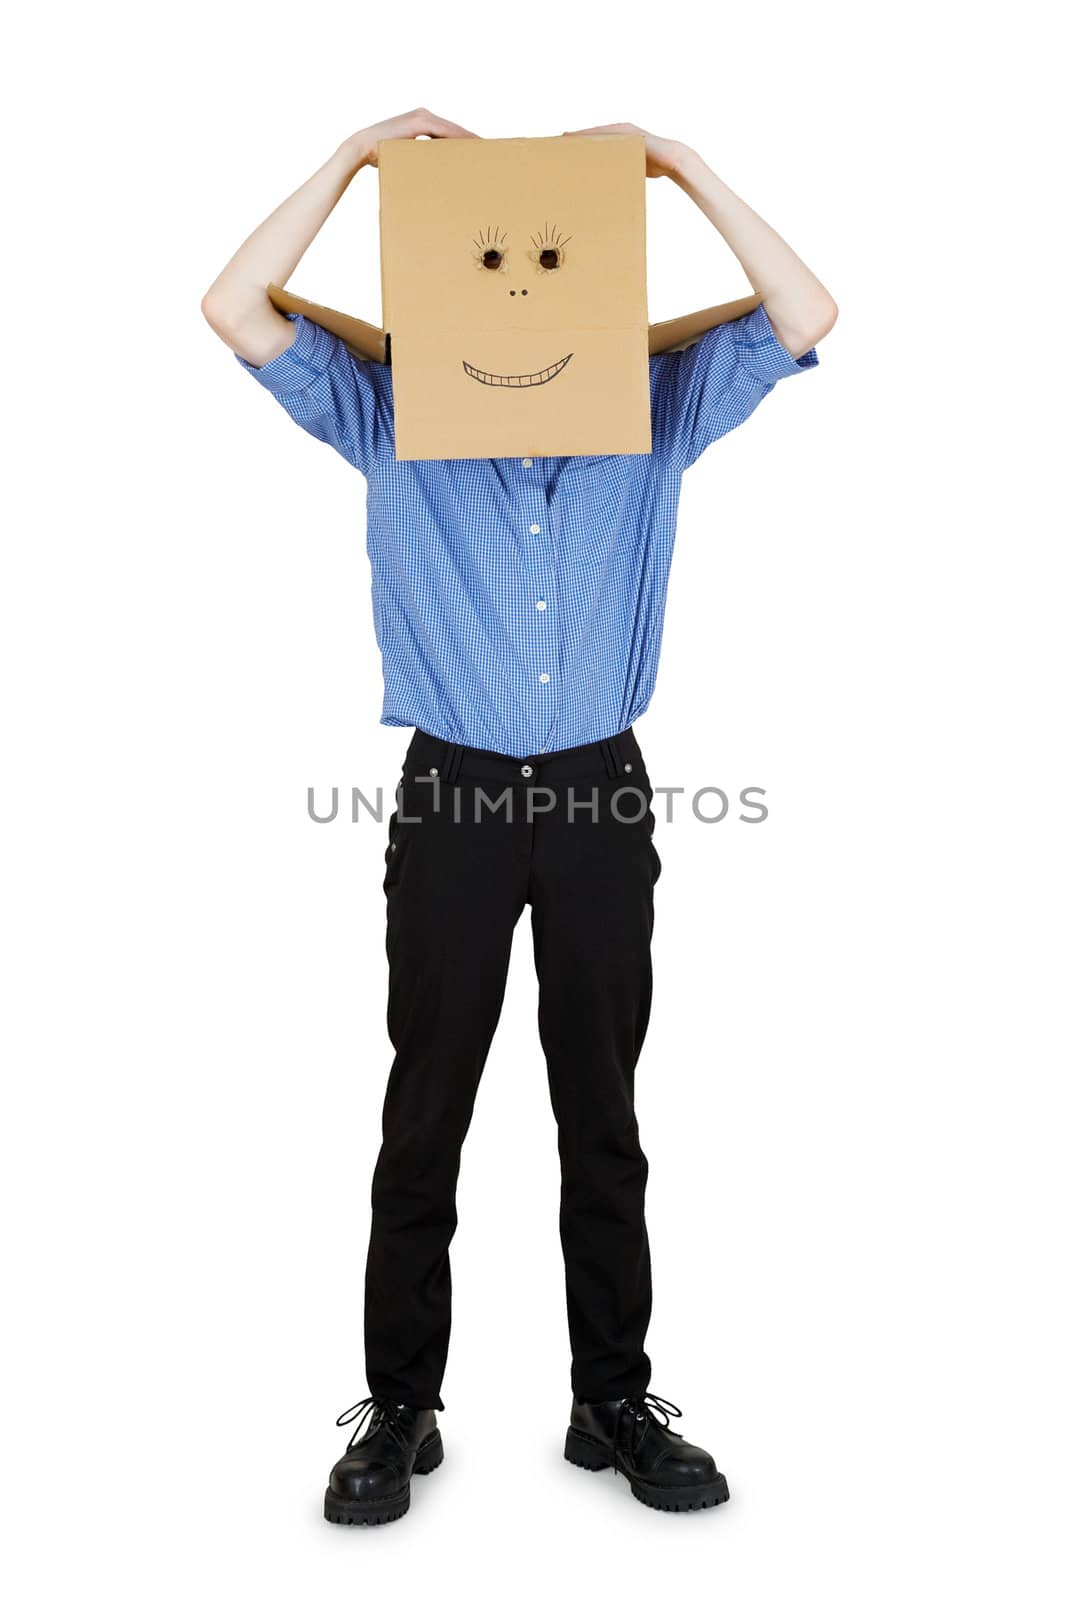 Funny man put on his head a box with a painted smile